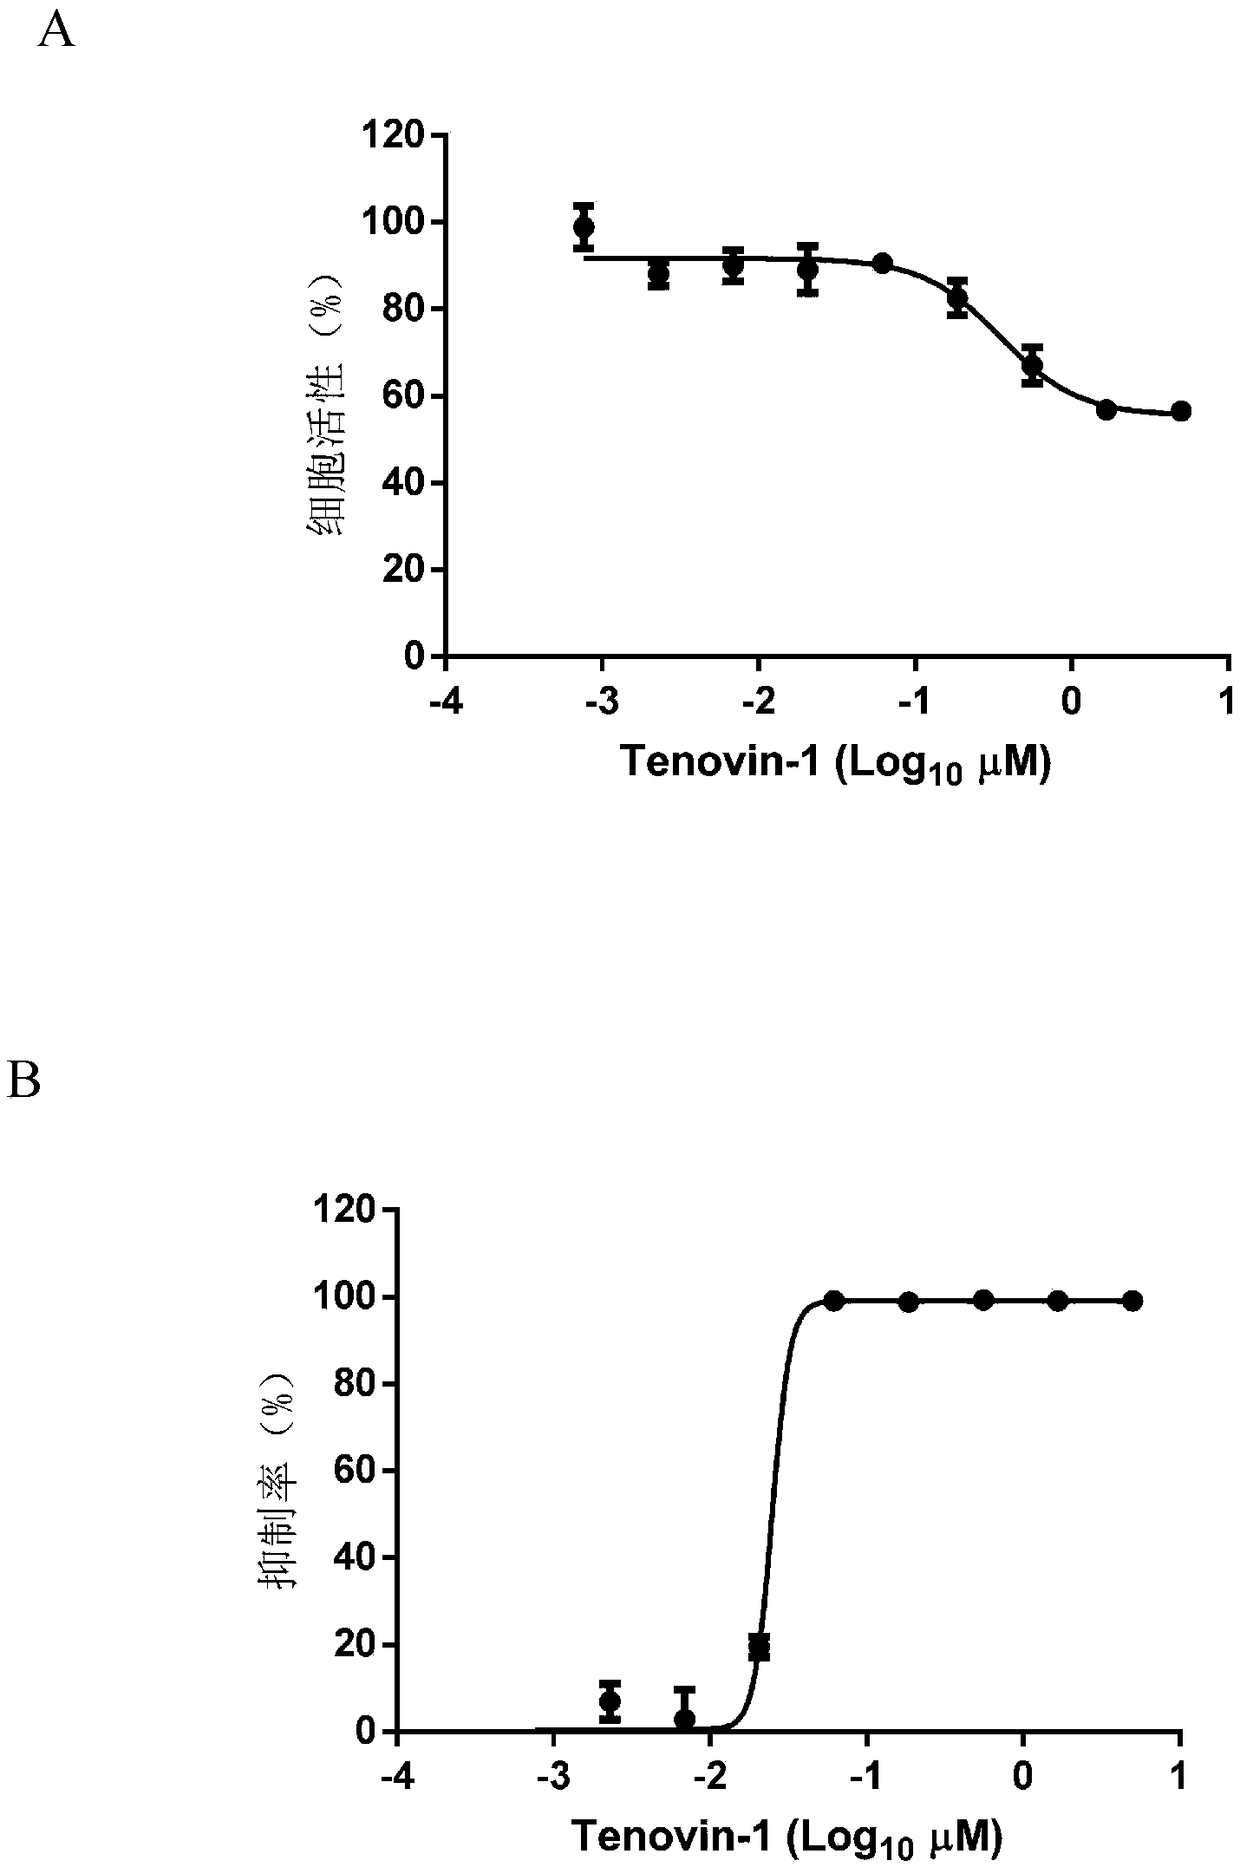 Application of Tenovin-1 in preparing drug for preventing and controlling human herpes virus infection